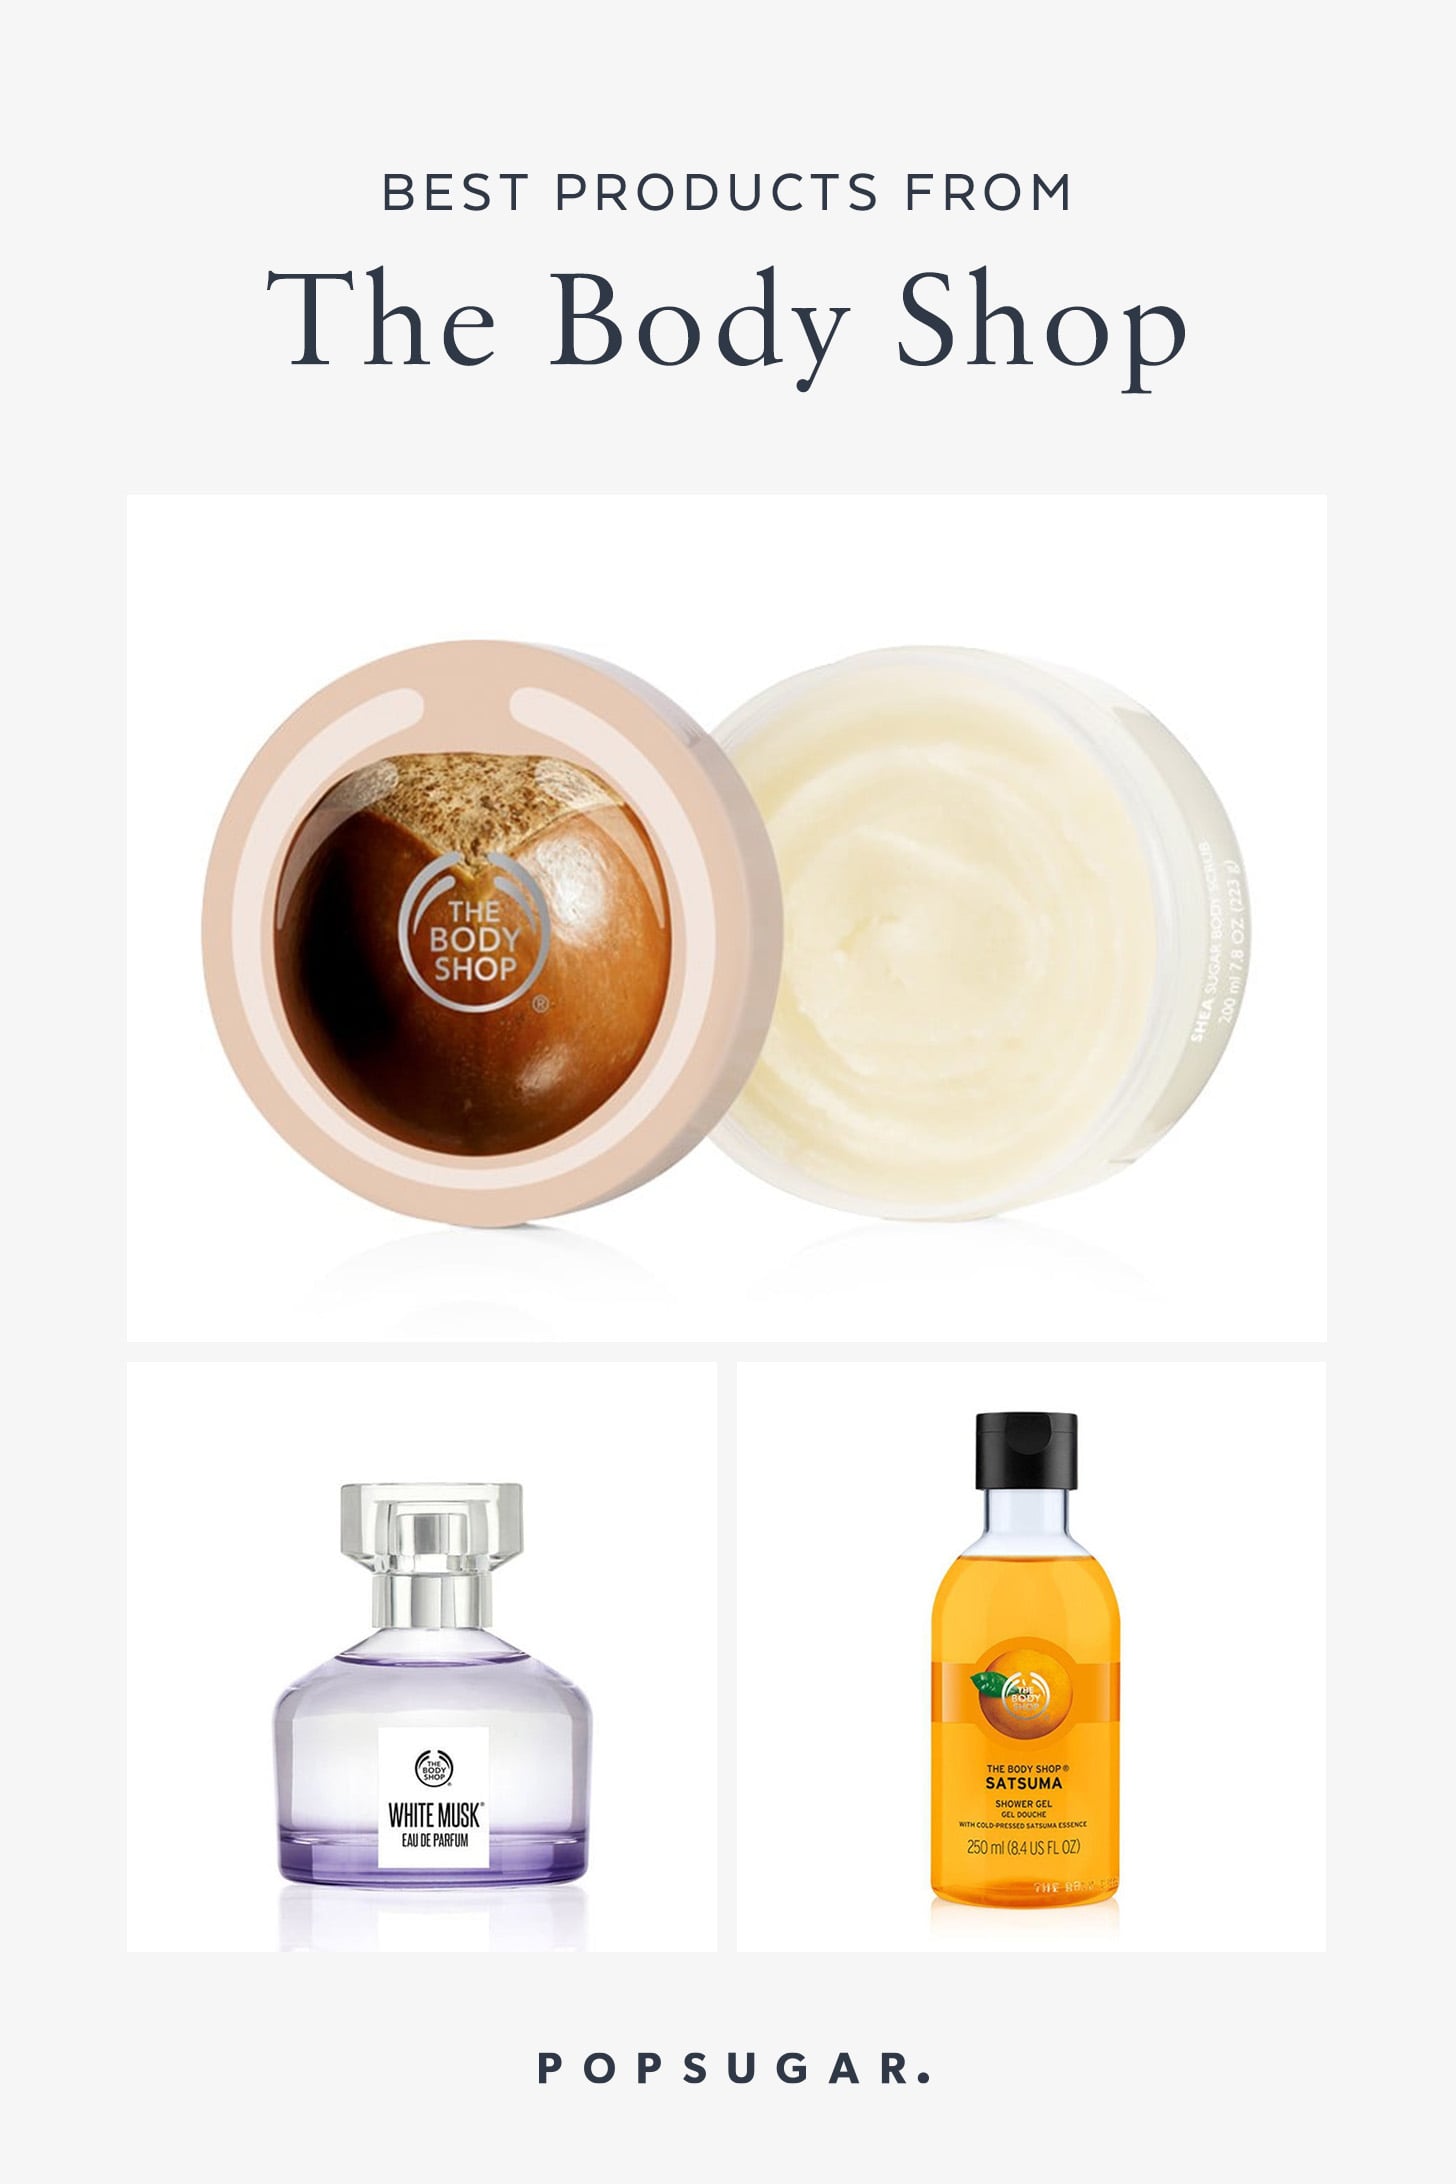 The Body Shop Best-Sellers To Buy Plus Why It's A Cult Brand to Know